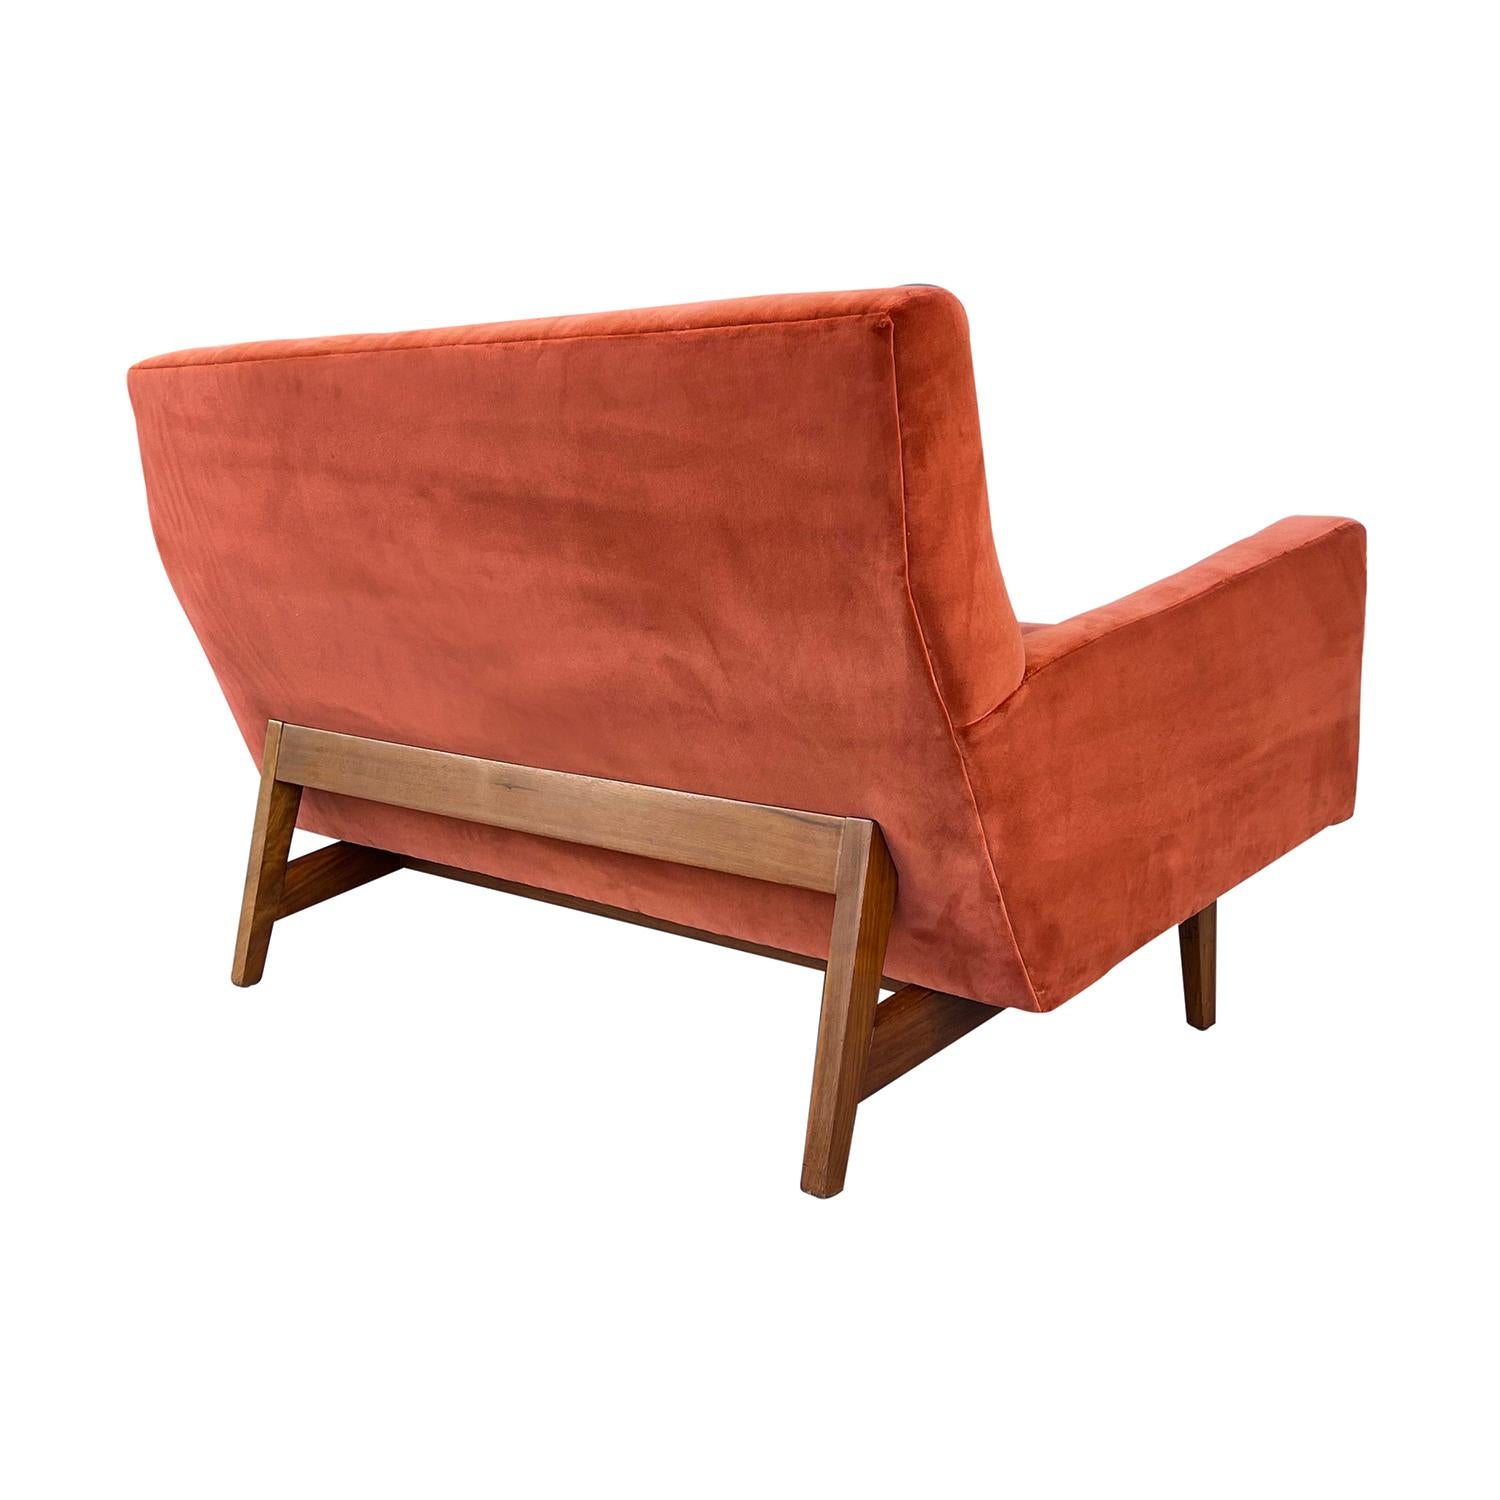 20th Century American Two Seater Sofa - Walnut Settee by Jens Risom Design In Good Condition For Sale In West Palm Beach, FL